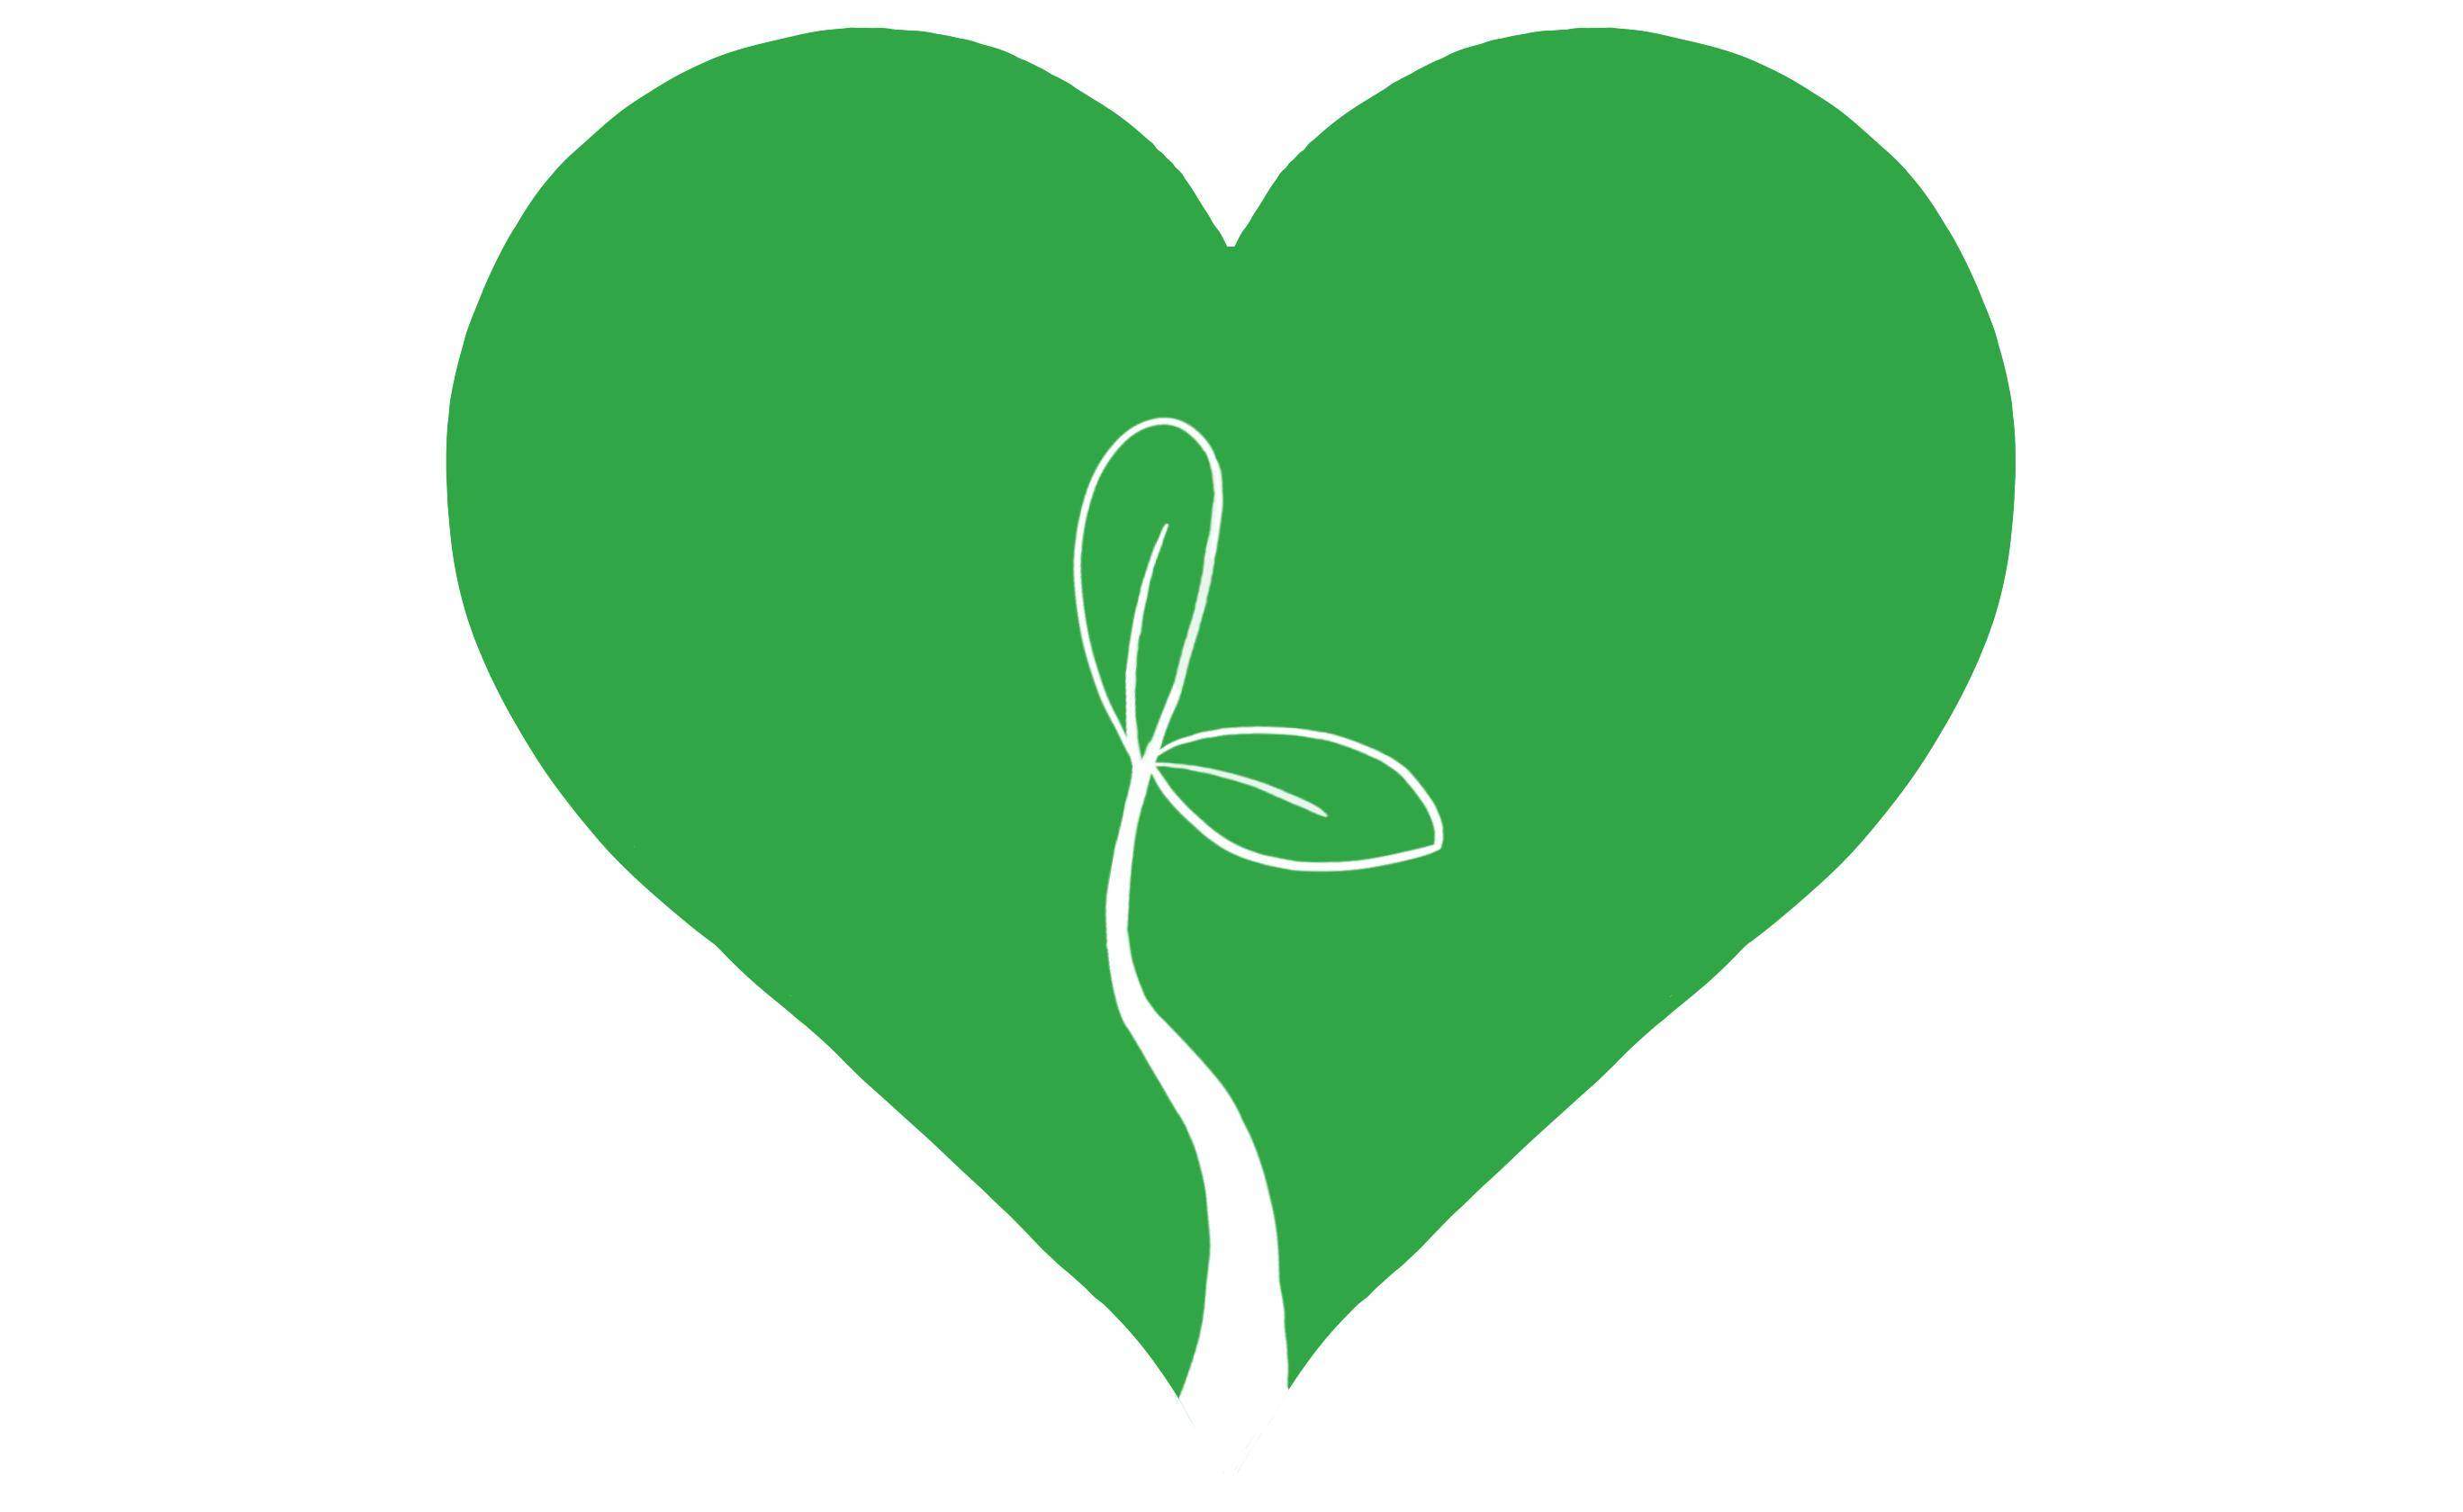 Green Heart with a sprout growing in the center